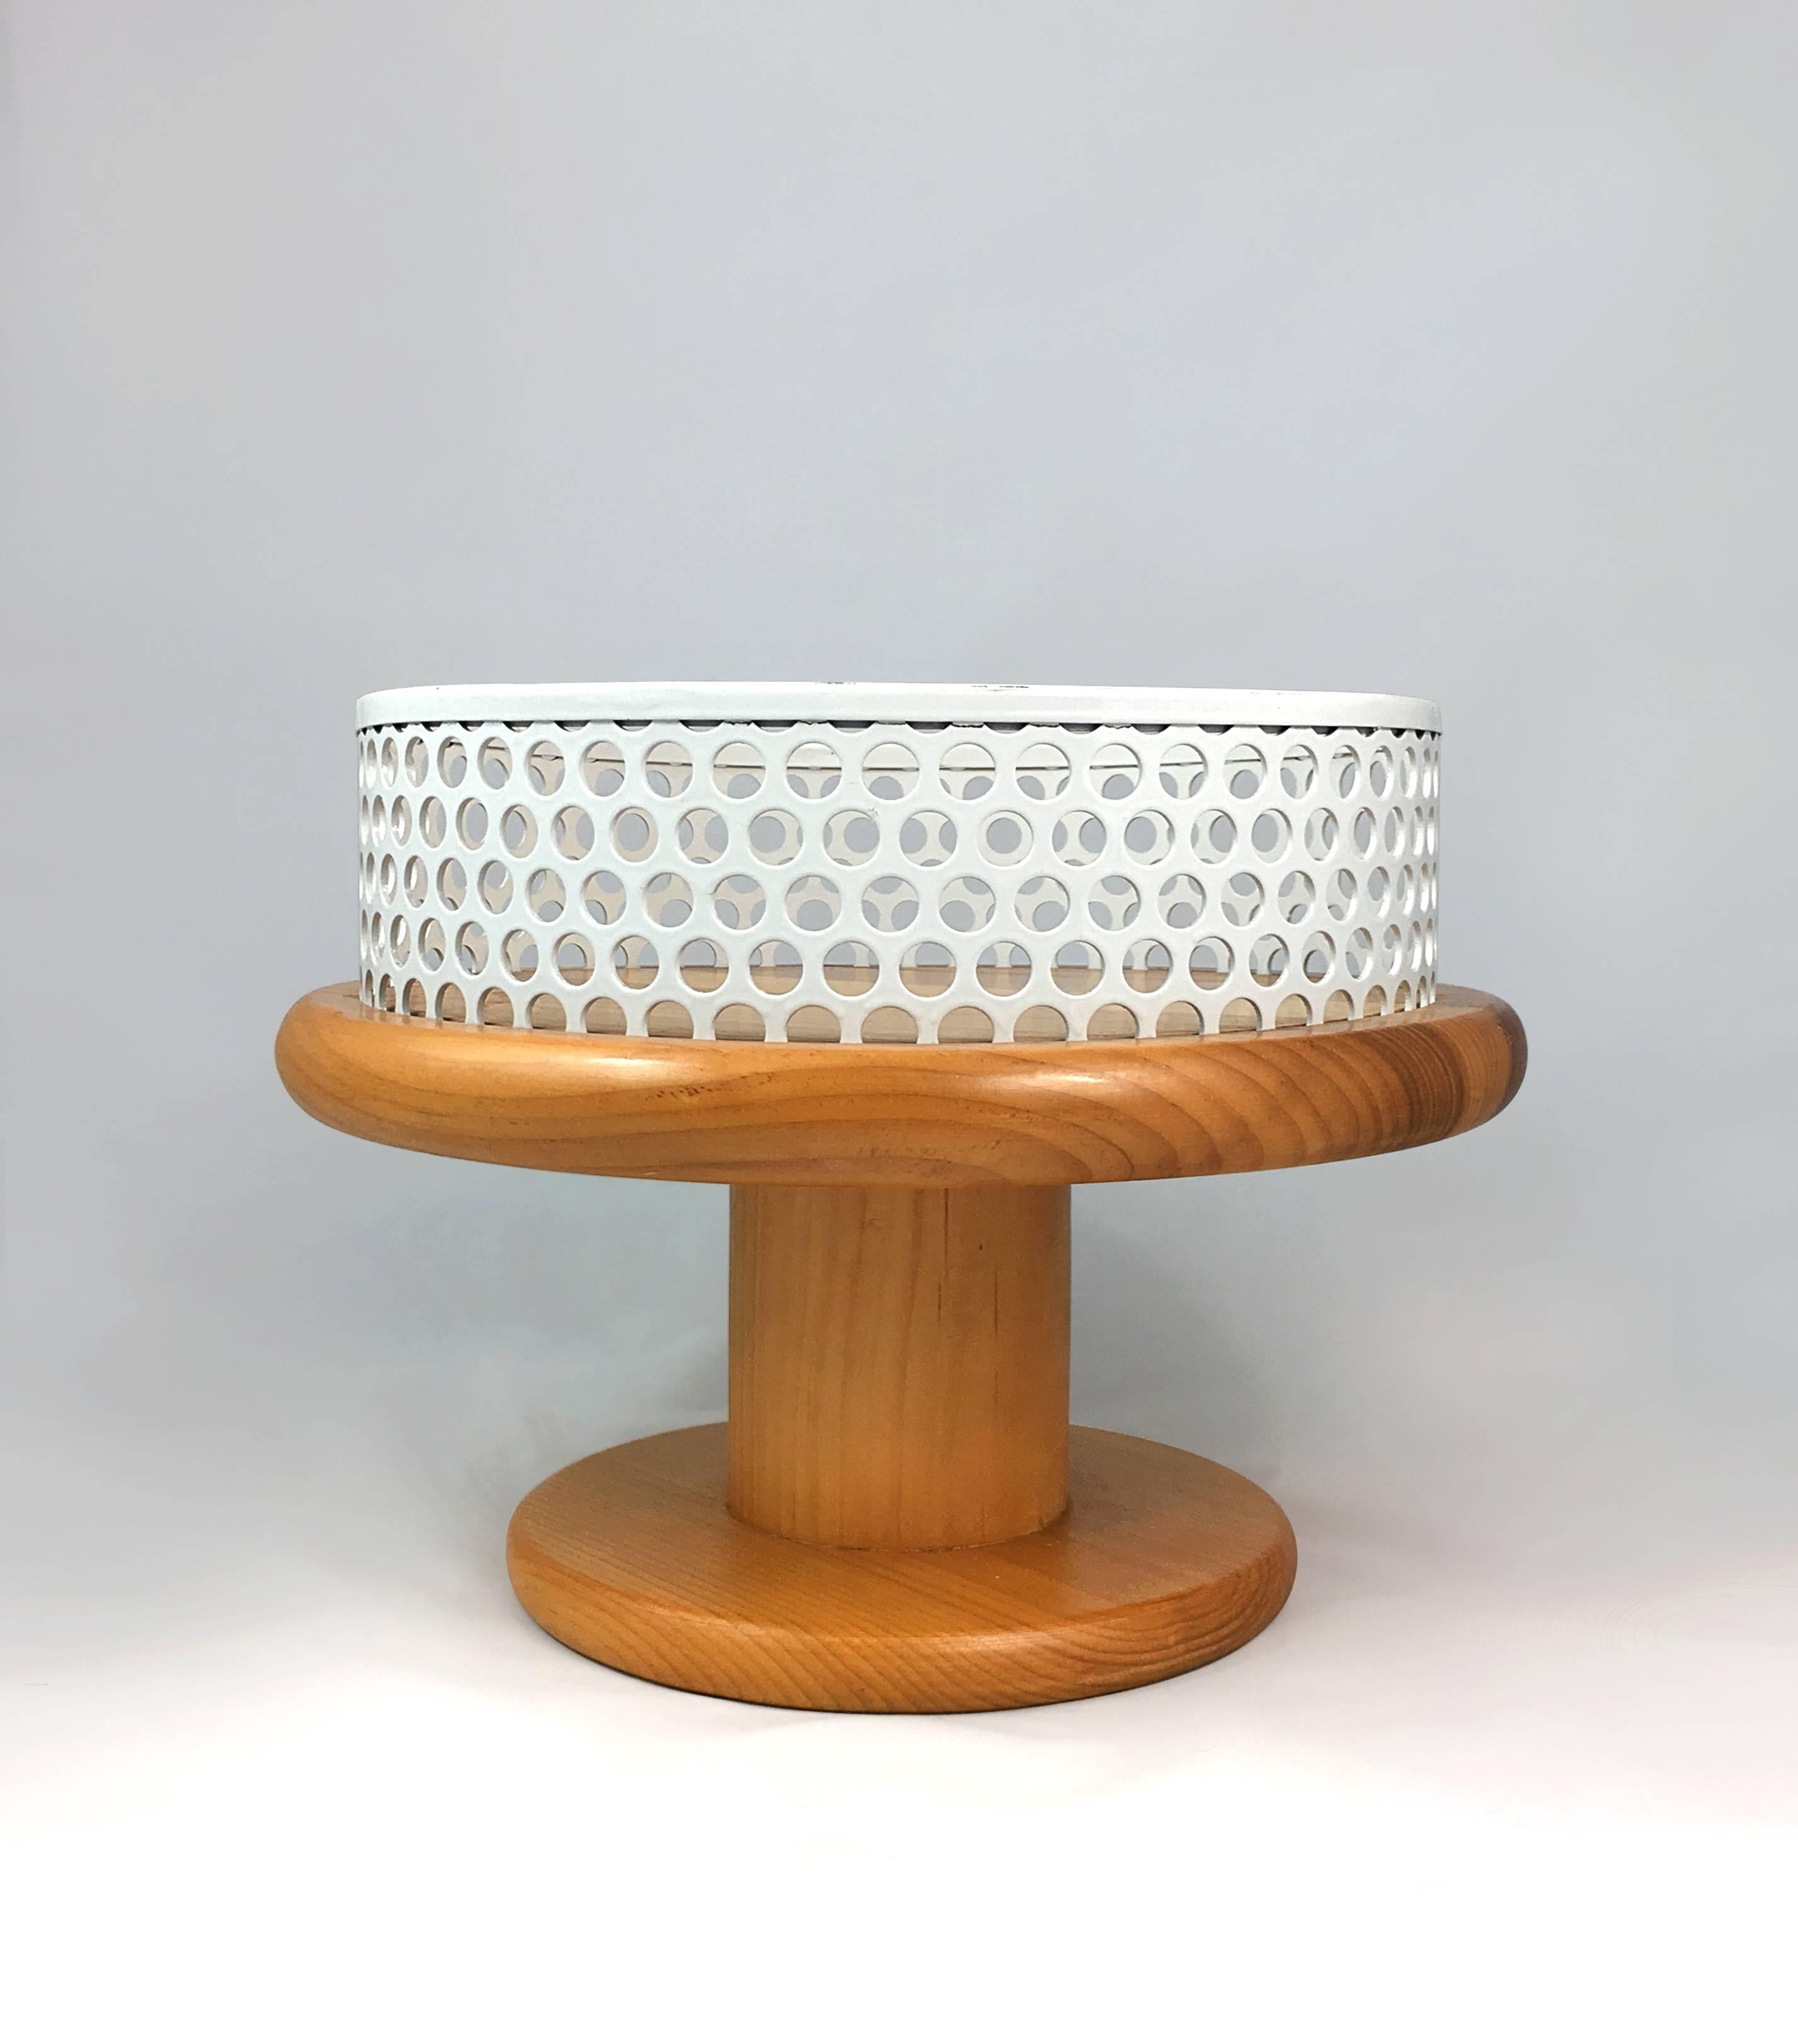 Fruit bowl on the polished walnut base with white perforated metal edge, designed by Ettore Sottsass. Manufactured by EAD, Italy.
Fire mark with designer's signature imprinted on the base.